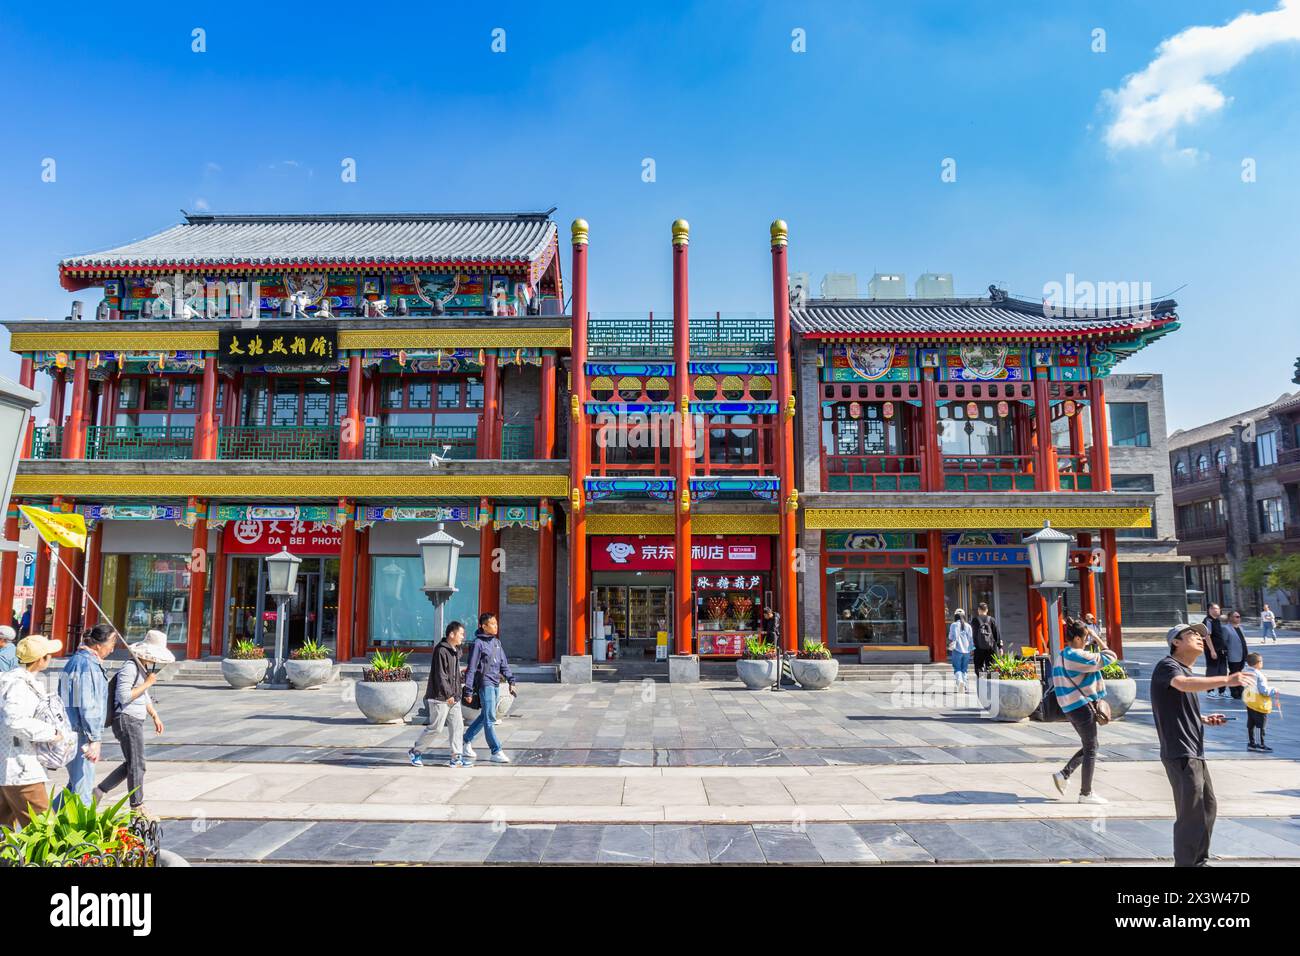 Colorful shops in the touristic Qianmen street in Beijing, China Stock Photo